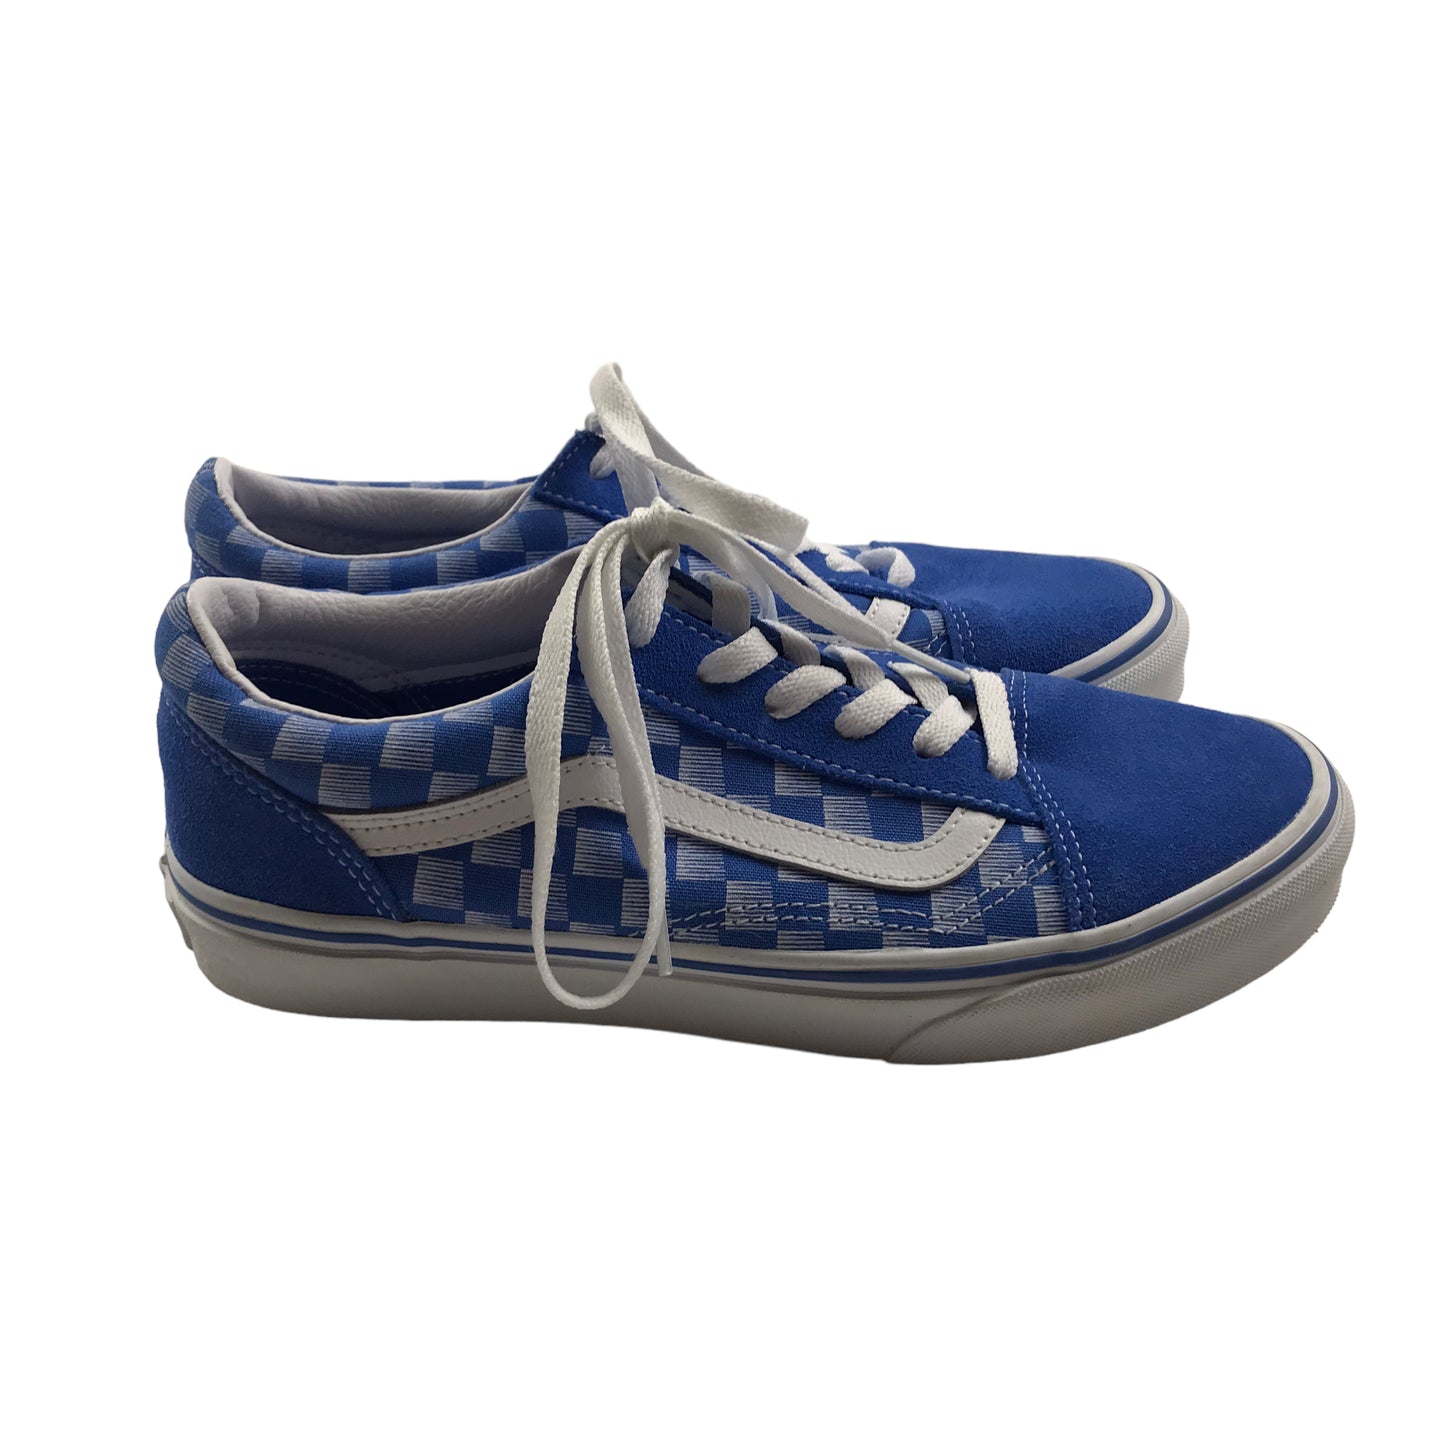 Vans Royal Blue and White Trainers Shoe Size 5